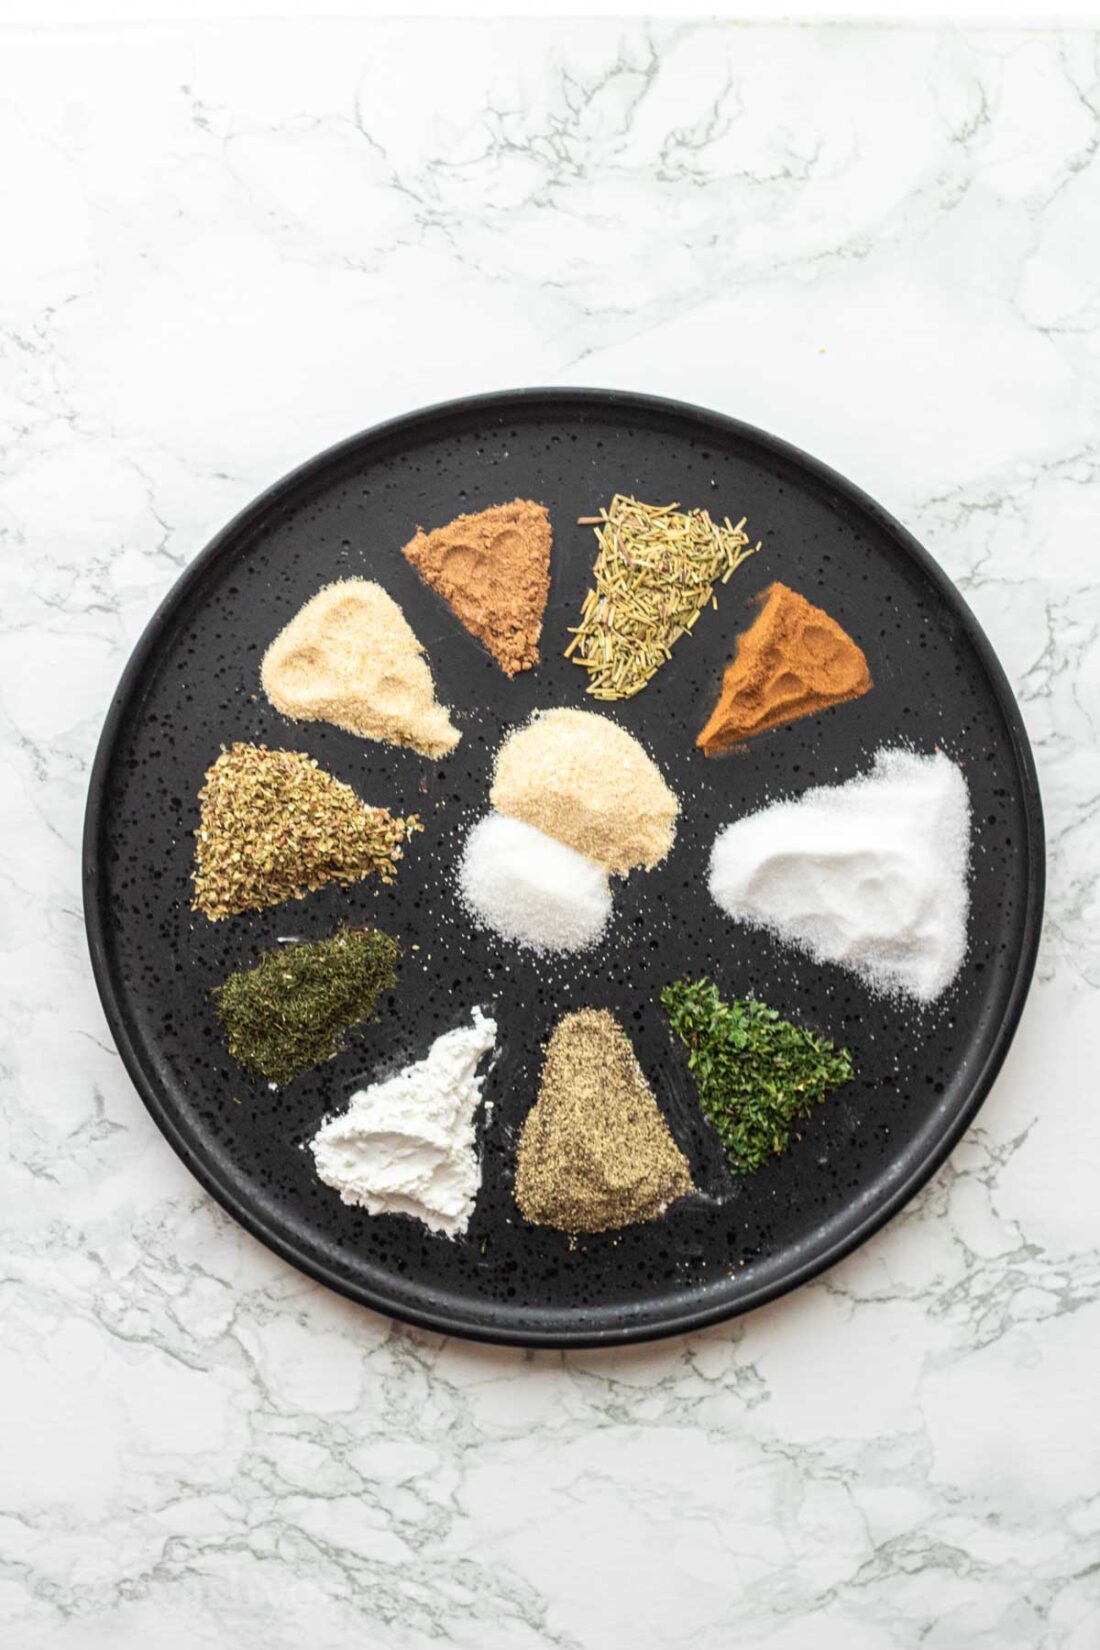 12 spices in triangle shape on black plate. 